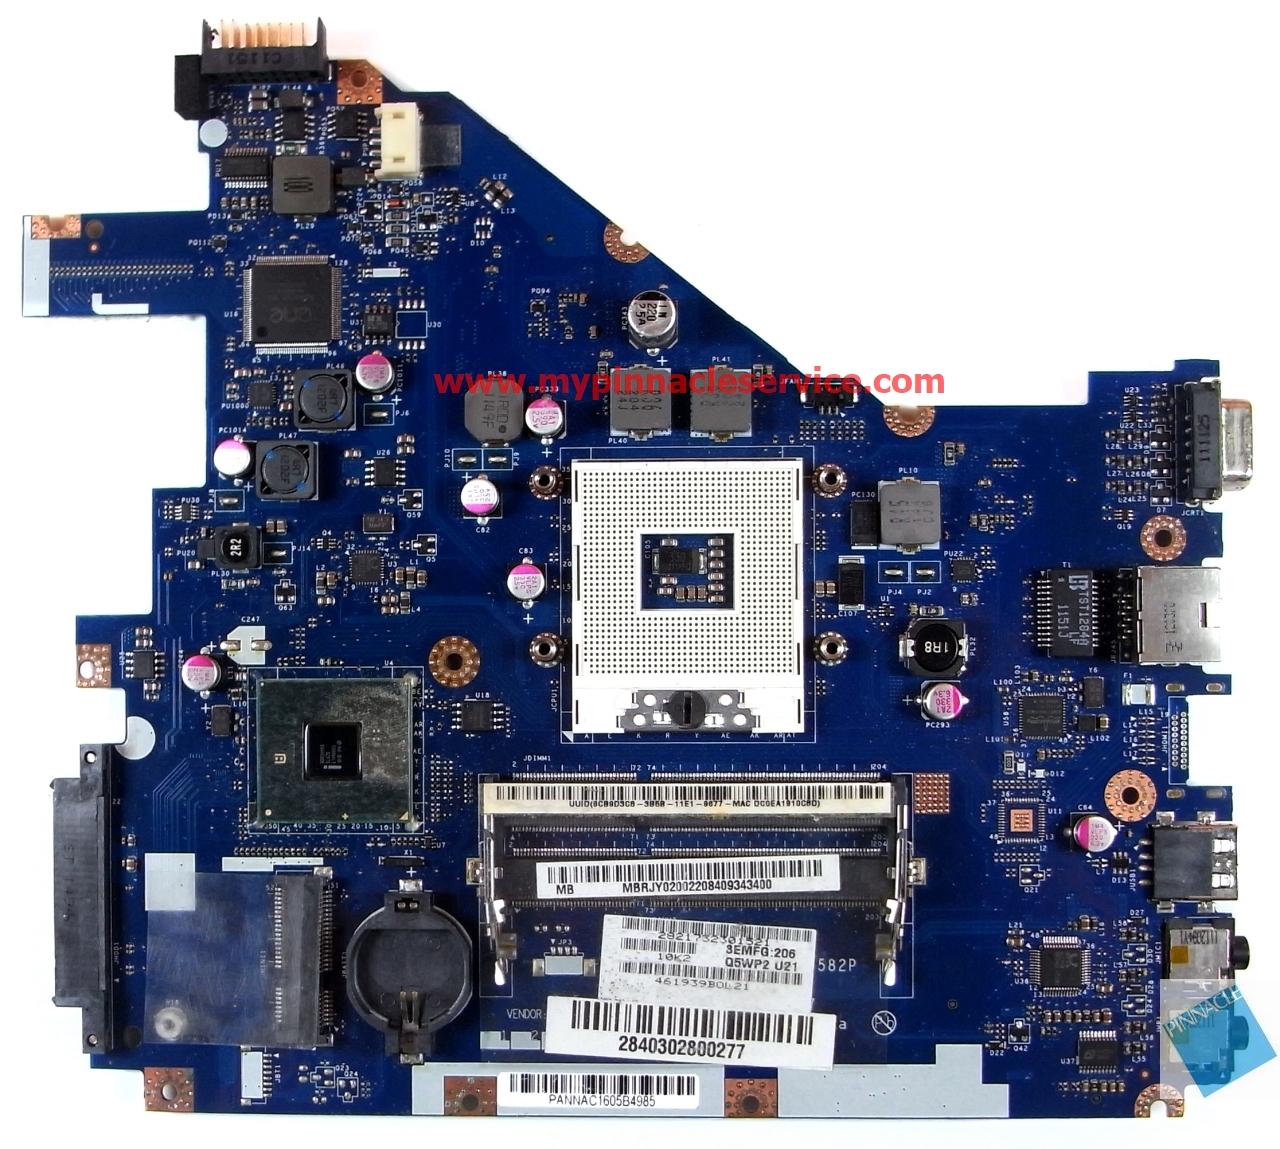 mbrjy02002-motherboard-for-acer-aspire-5333-5733-emachines-e529-e729-la-6582p-r0012541.jpg